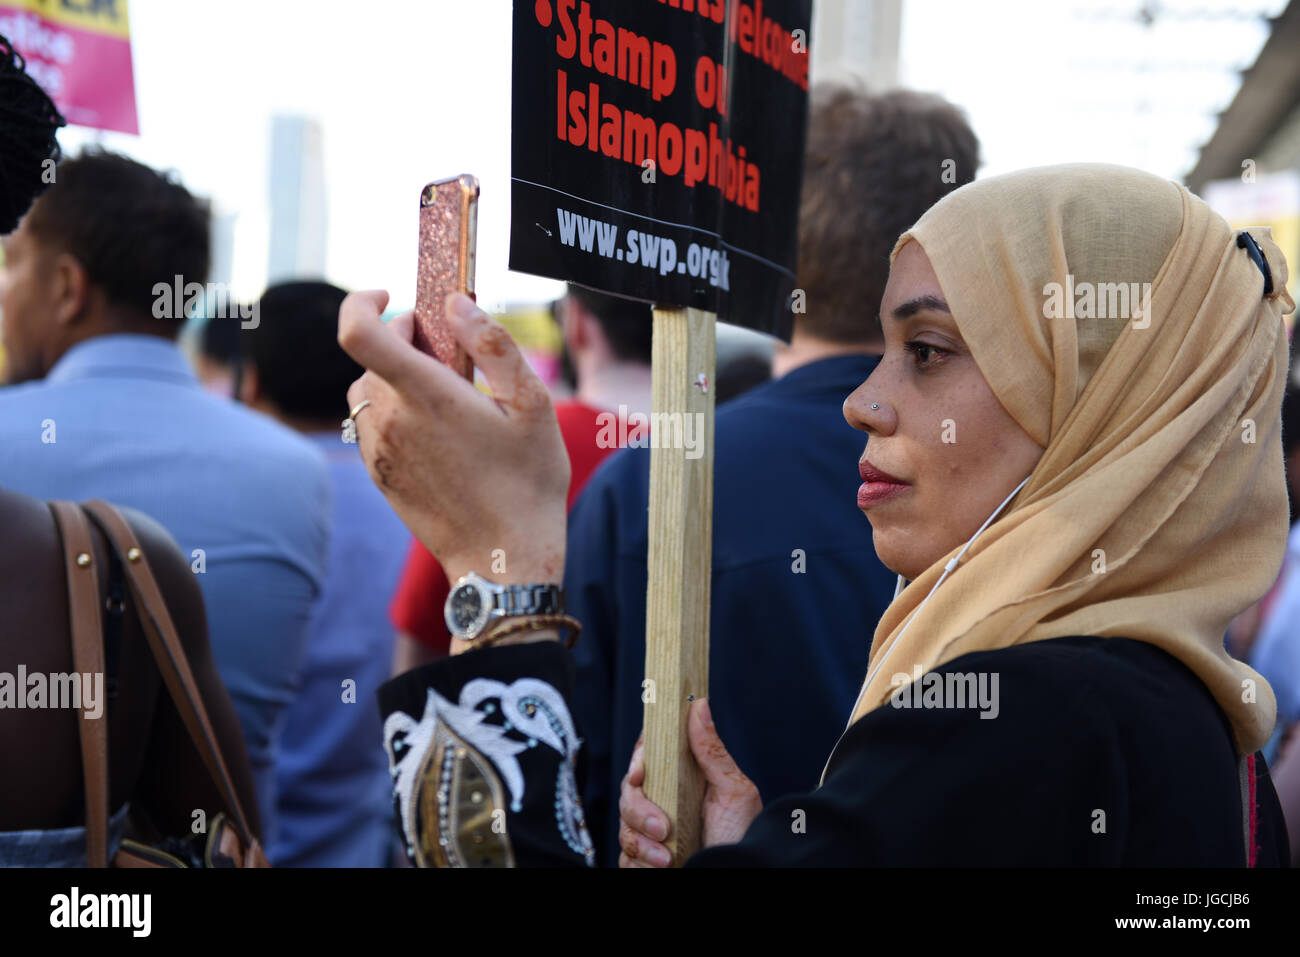 London, UK. 05th JUL 2017. 'STOP ACID ATTACKS' emergency protest outside the Stratford station in East London. Protesters gathered to protest against the recent acid attacks and increasing Islamophobia. Muslim woman is filming the protest with mobile phone. Credit: ZEN - Zaneta Razaite / Alamy Live News Stock Photo